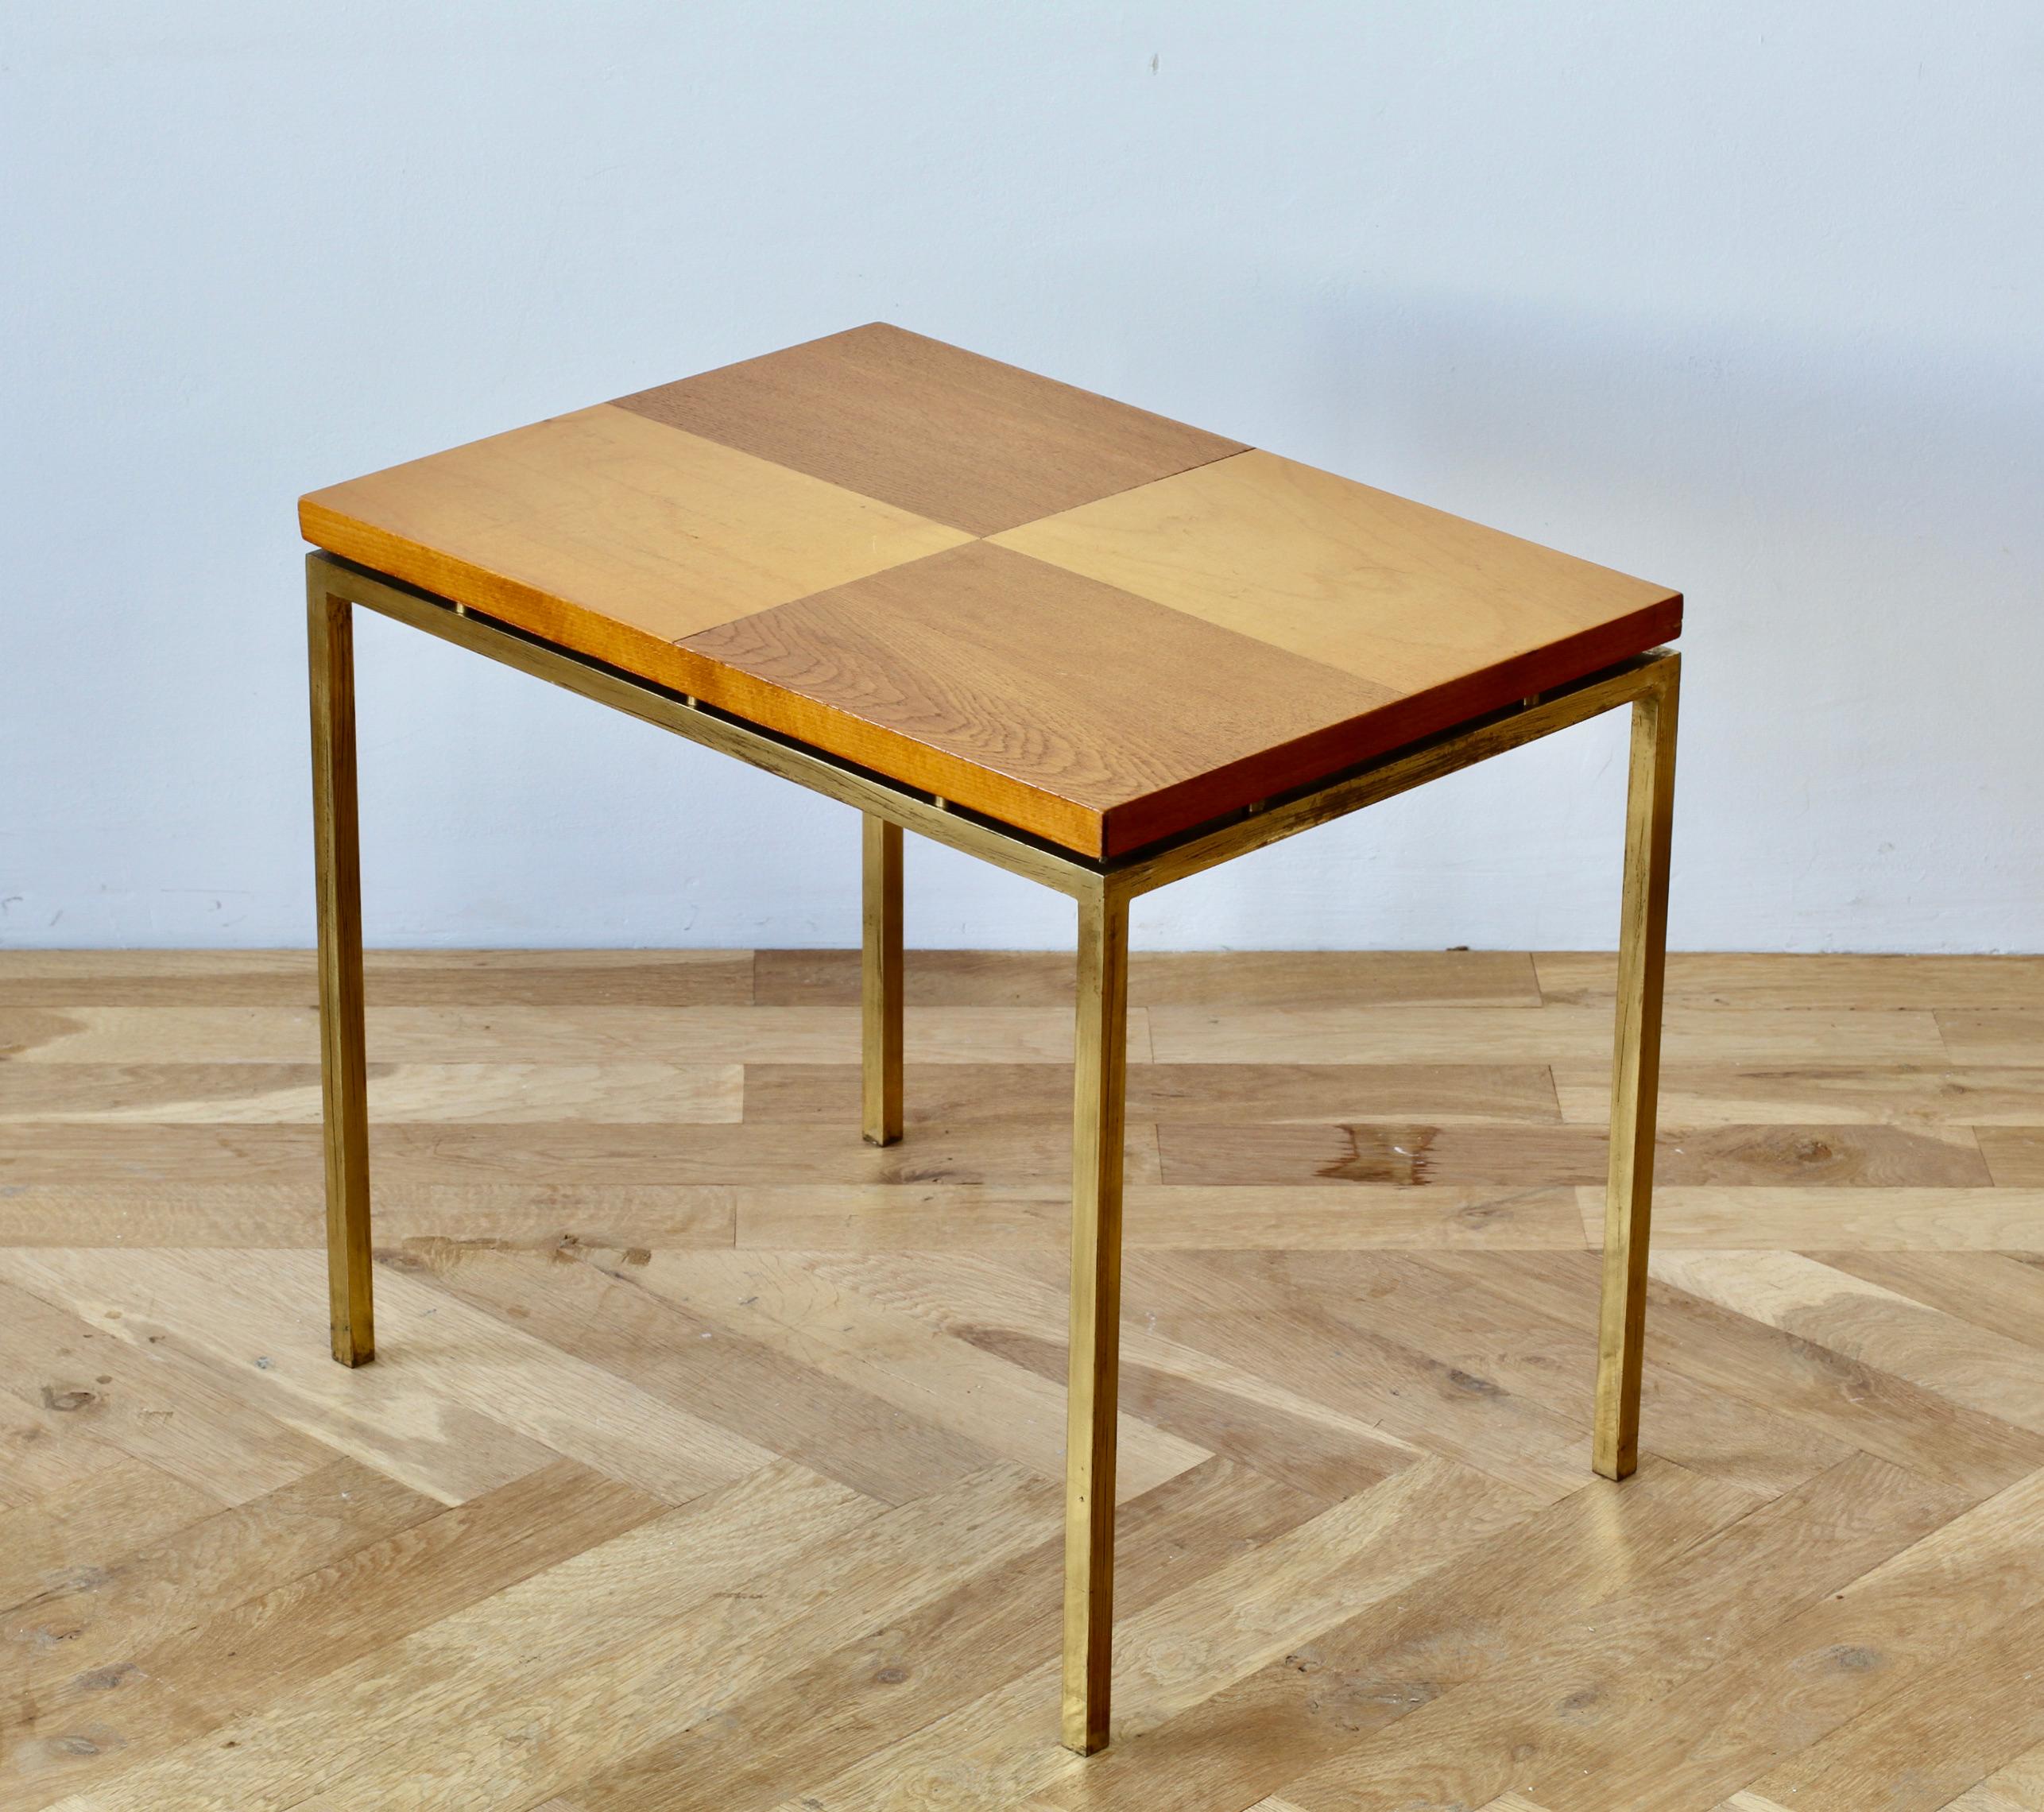 A wonderful German made Mid-Century one-off / unique tall side or end table in the style of Florence Knoll, circa 1950s. Made from polished square tubular brass and veneered wood in a two-tone checkered pattern. This delightful table, will add